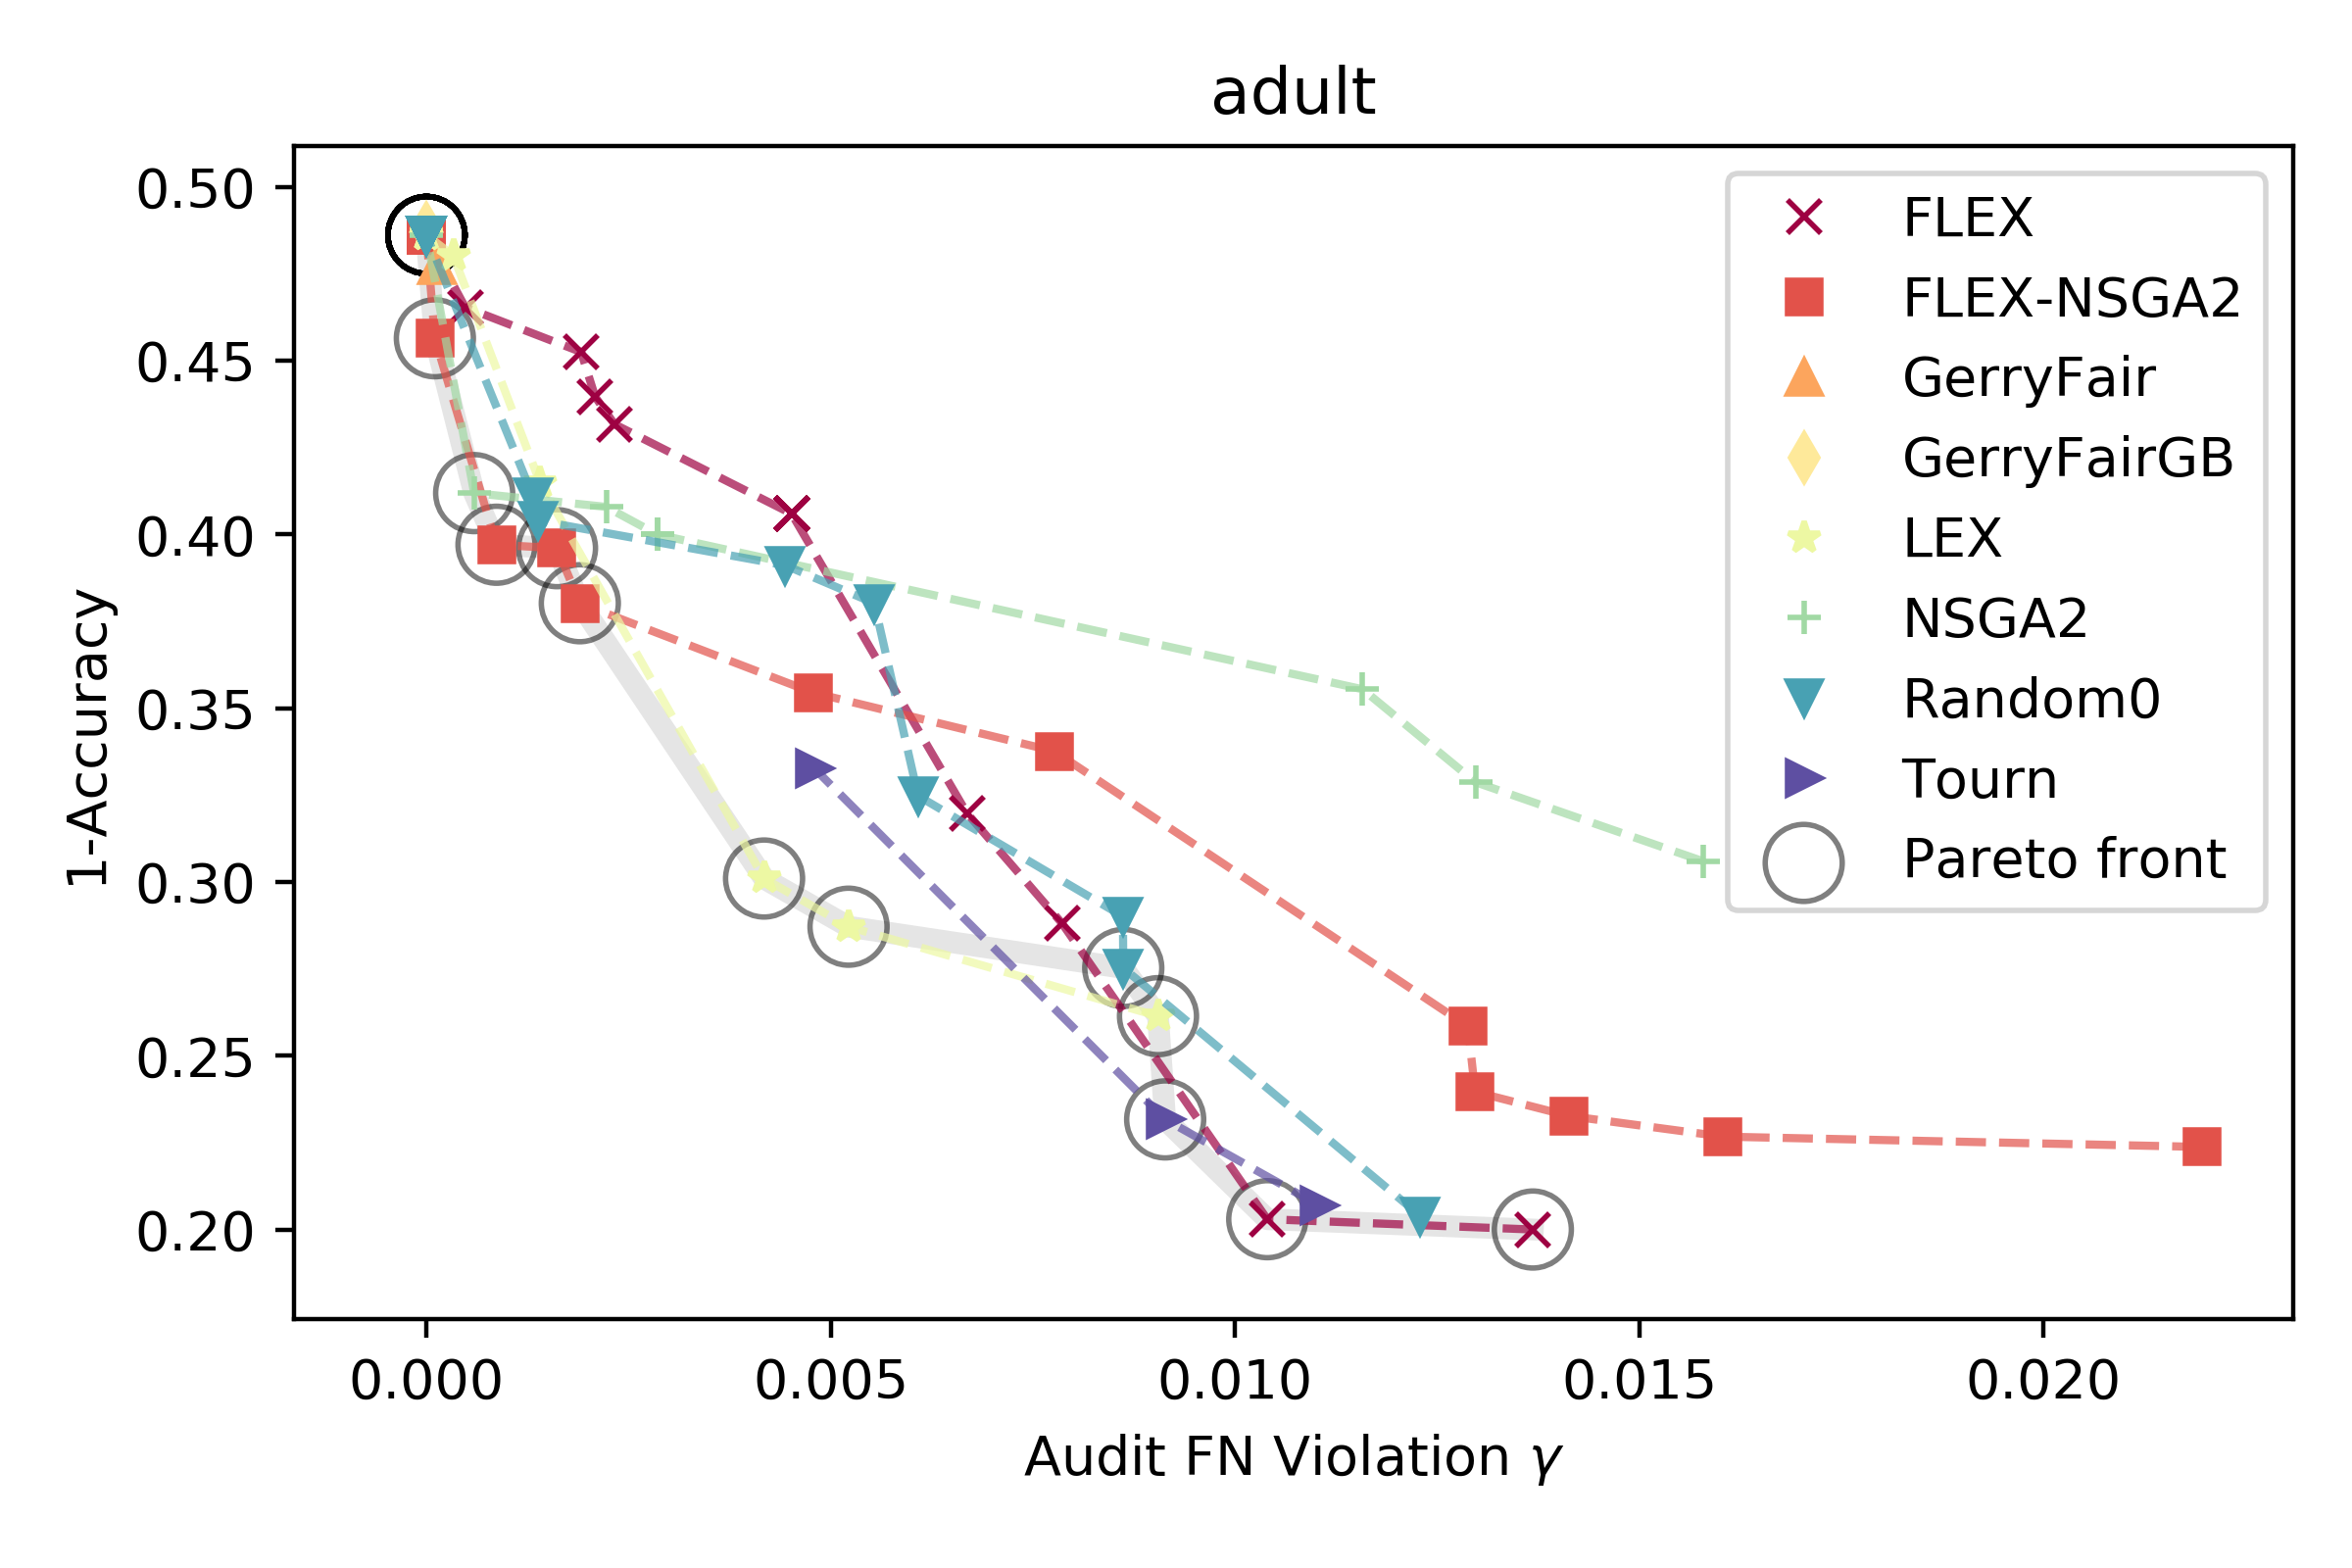 An example of different ML models for health care and their trade-off between error and fairness on the adult dataset